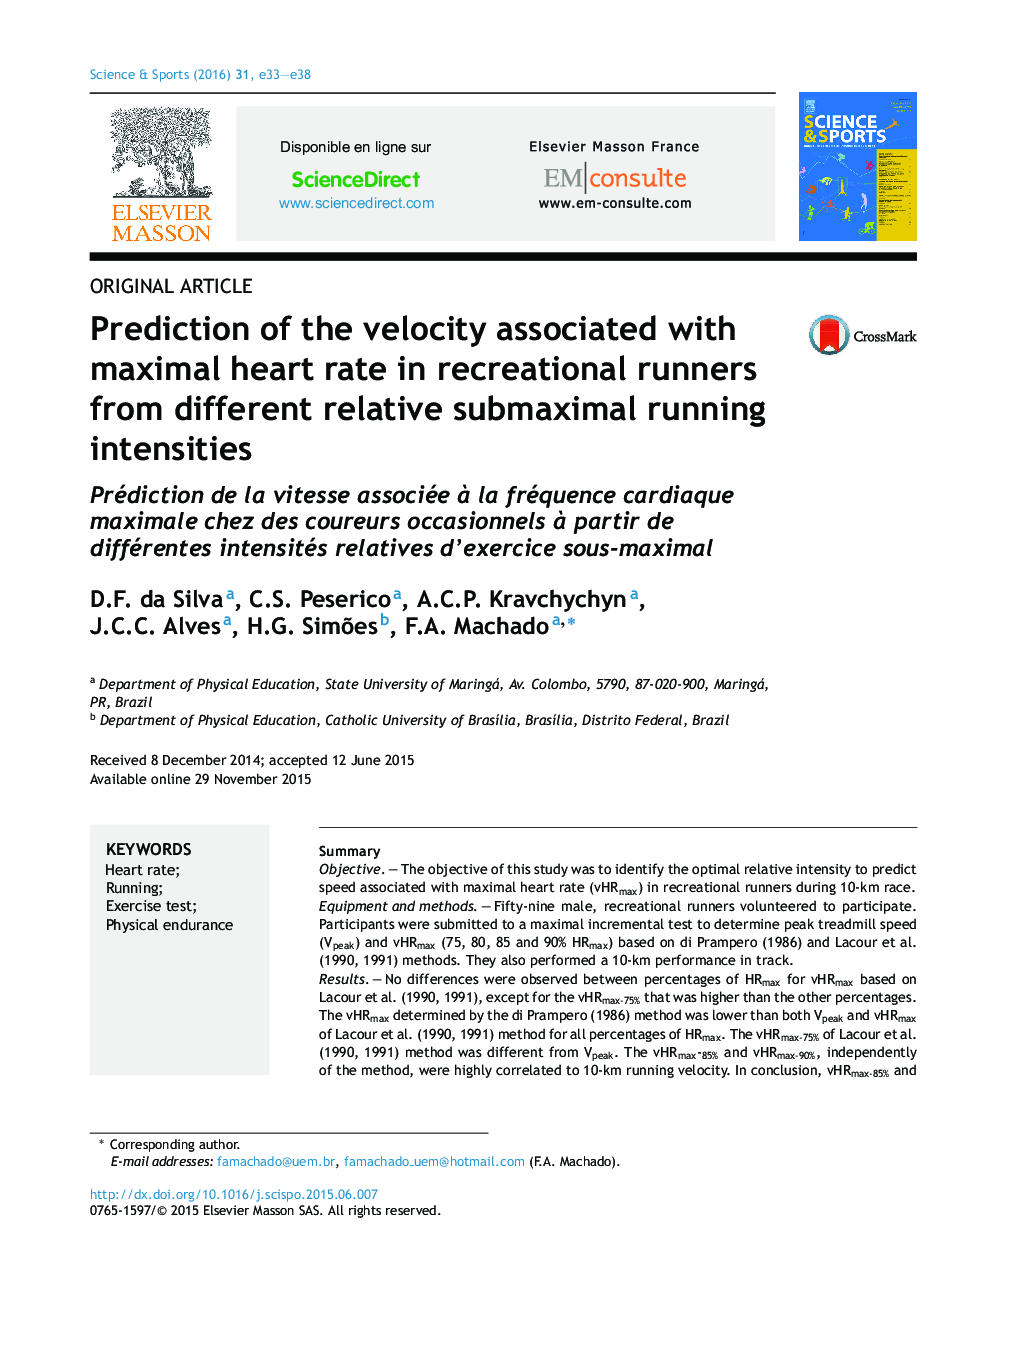 Prediction of the velocity associated with maximal heart rate in recreational runners from different relative submaximal running intensities